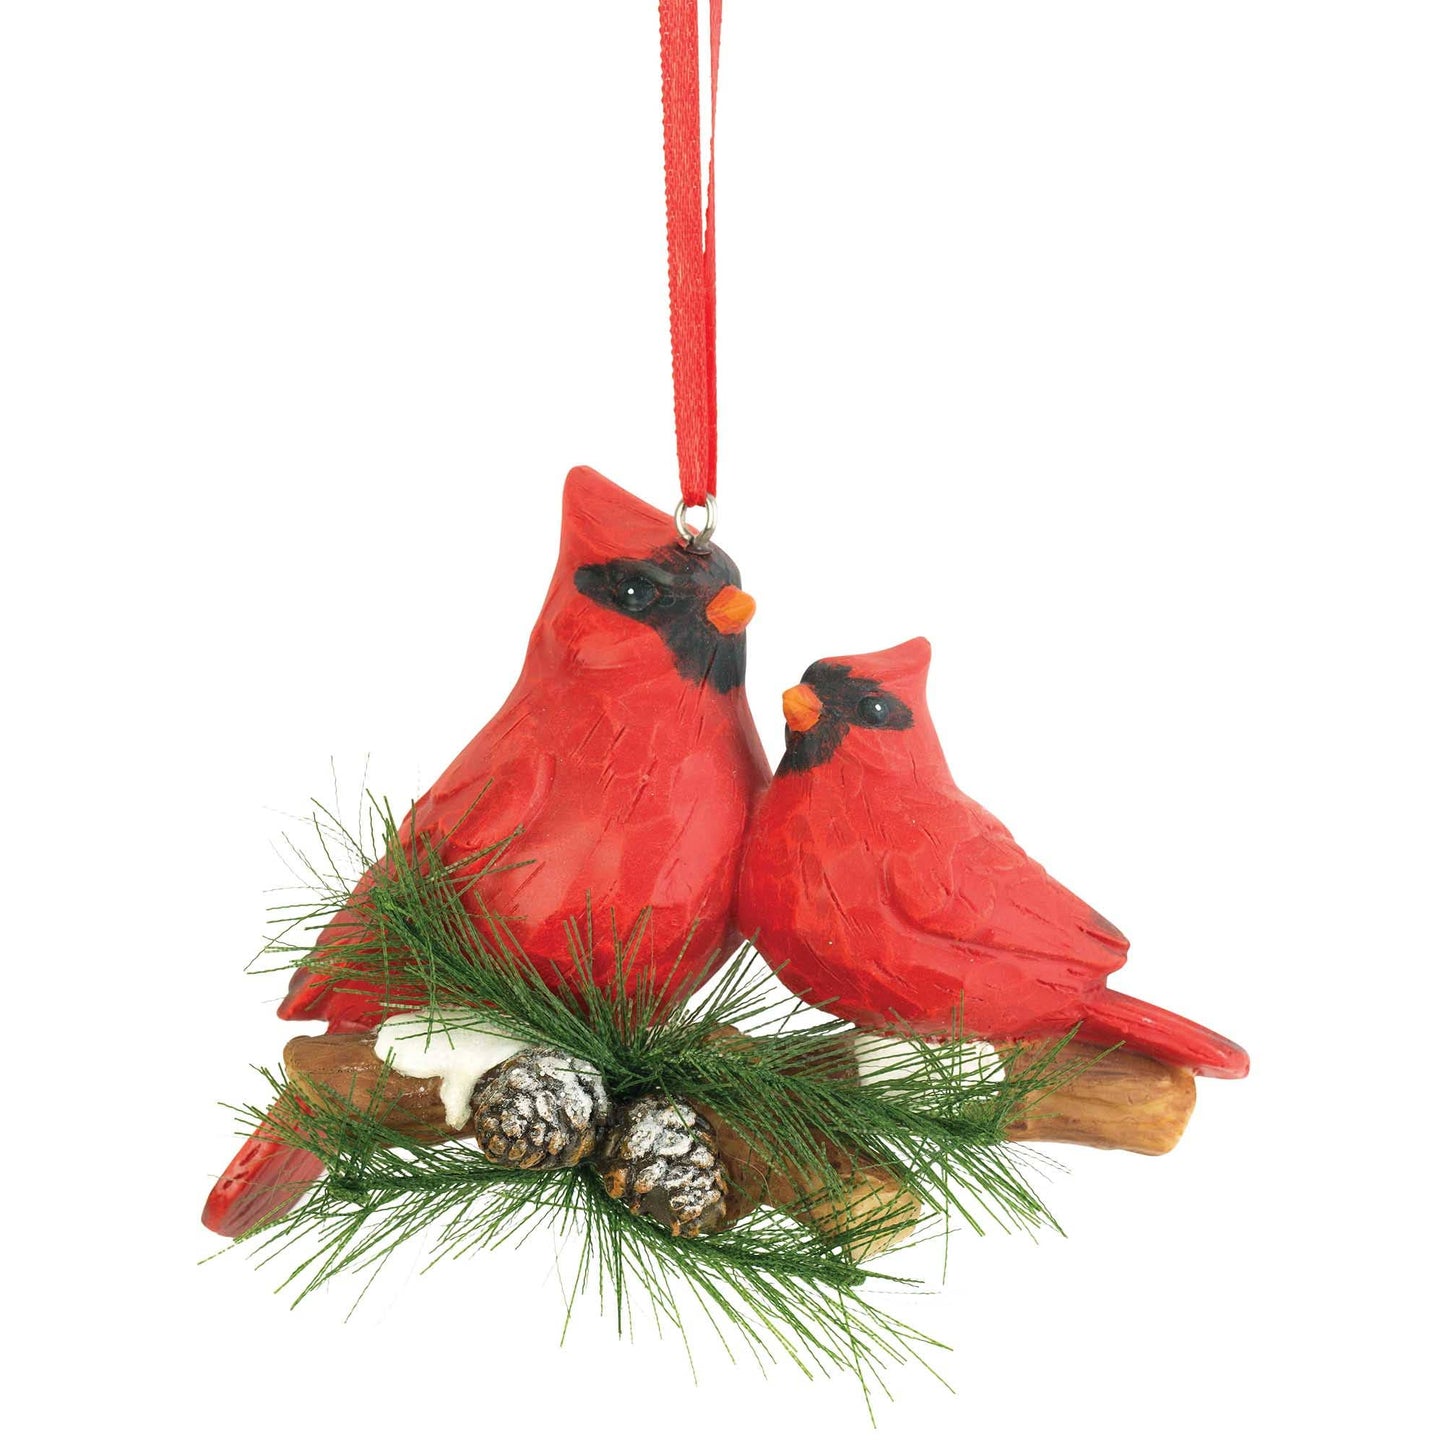 Dicksons - RED BIRDS ON BRANCH ORNAMENT 3.125"H